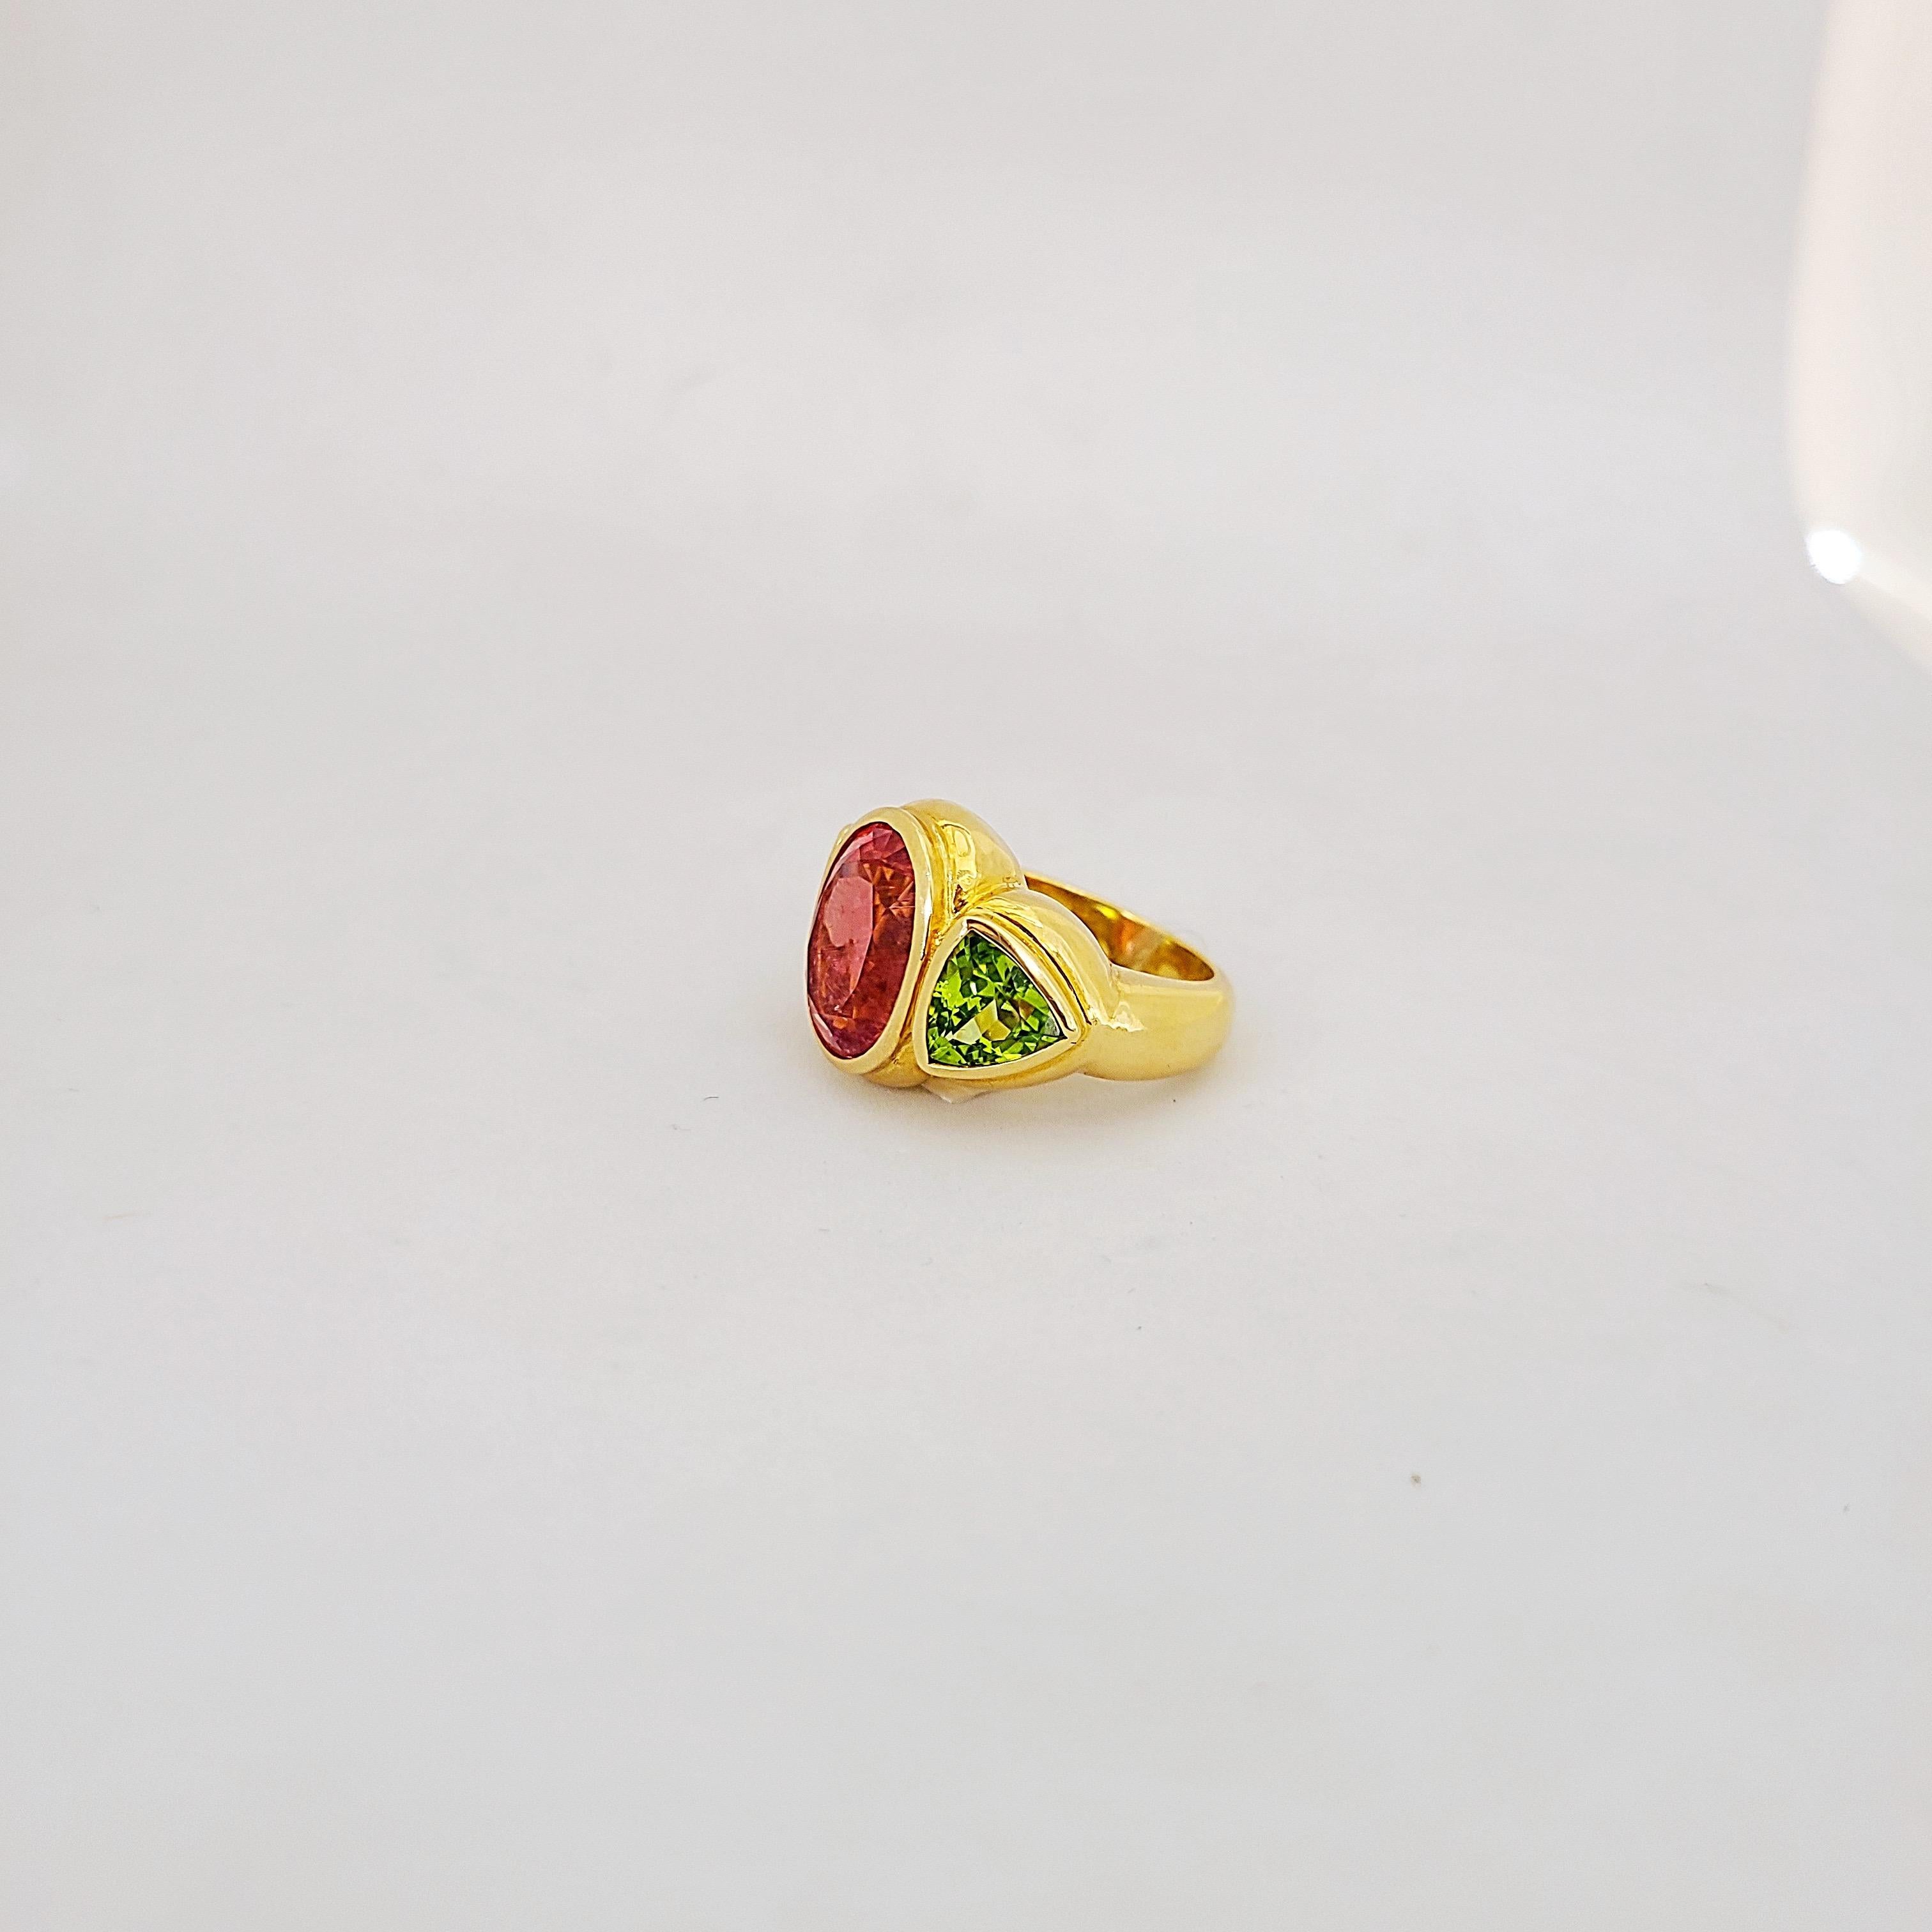 Cellini 18KT Yellow Gold Ring with 8.05 Carat Rubellite and 3.46 Carat Peridot For Sale 3